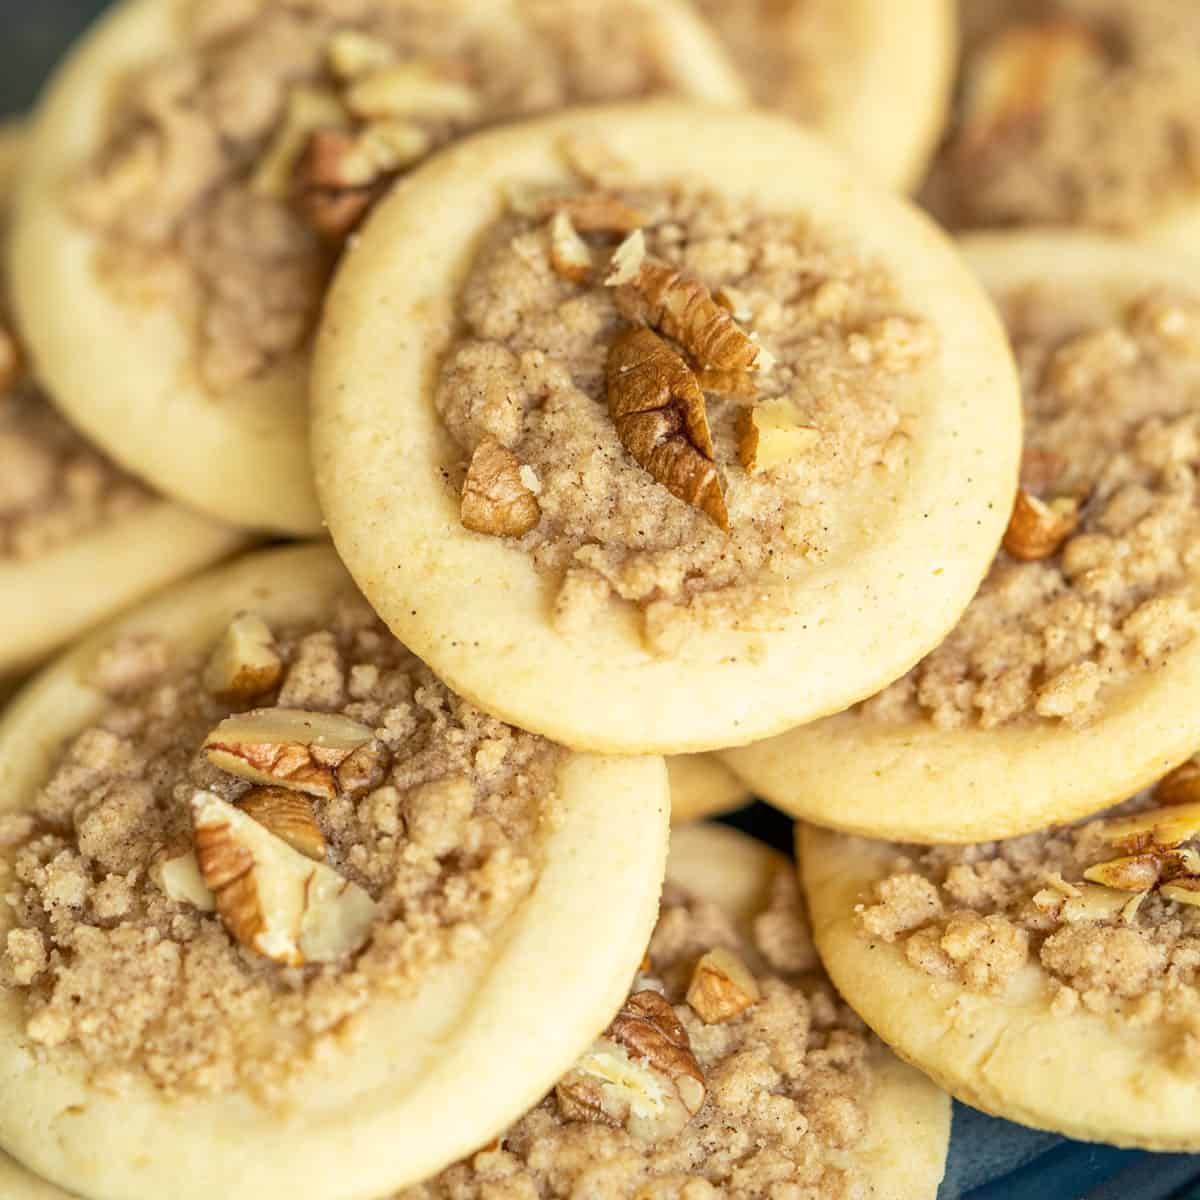 A breakfast cookie with cinnamon and walnuts on top.